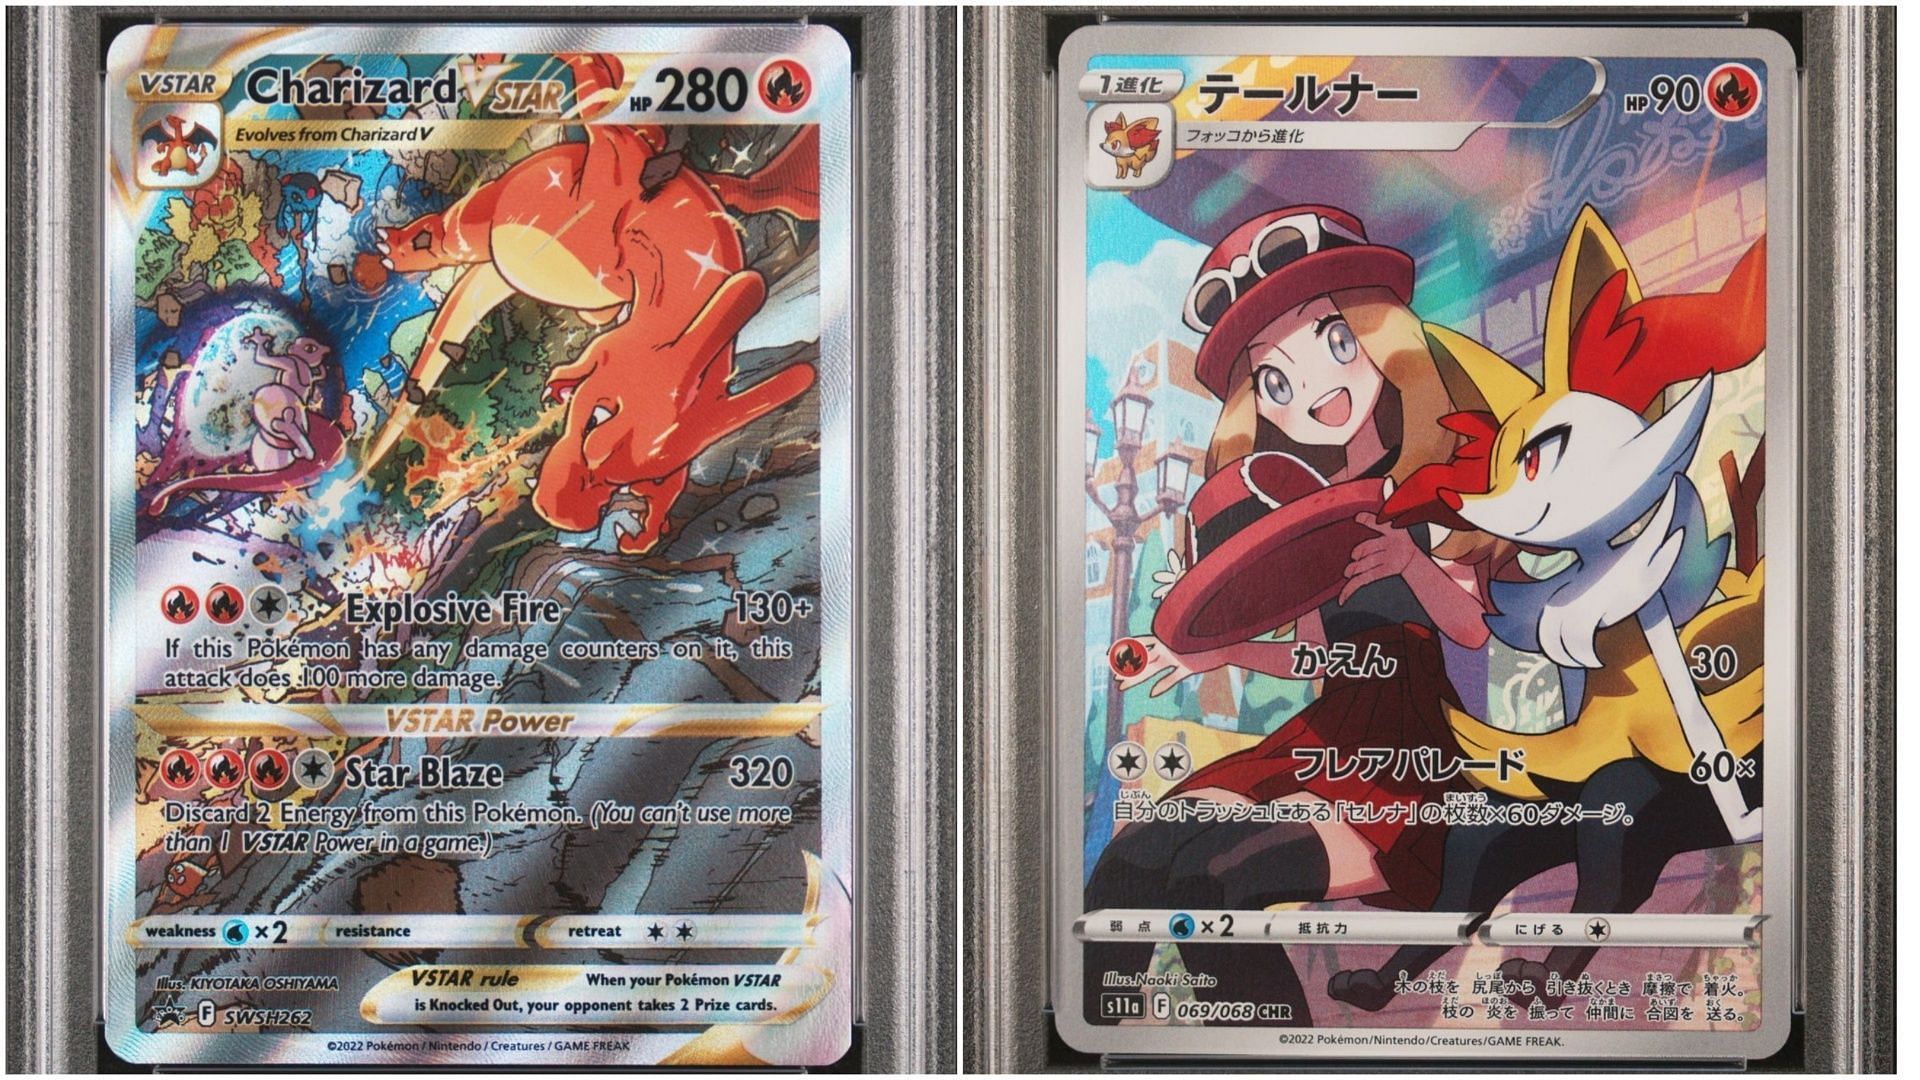 Which were the most-graded Pokemon cards this year?